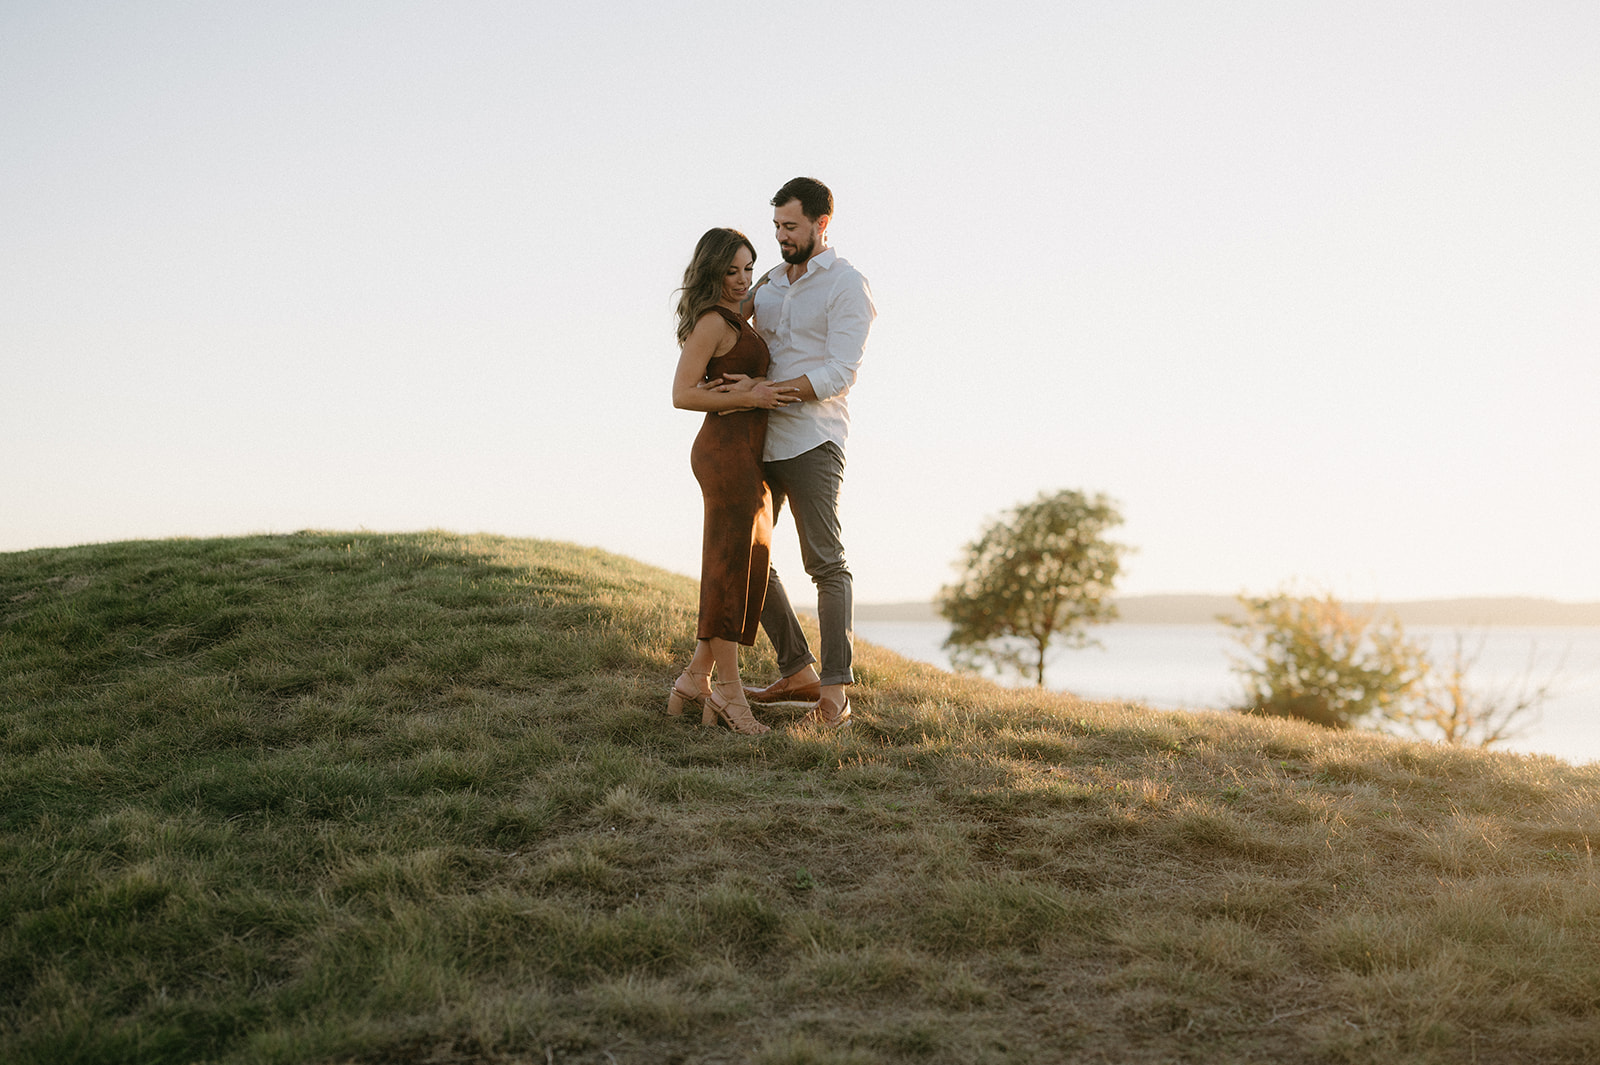 A couple standing closely on a grassy hill at sunset.